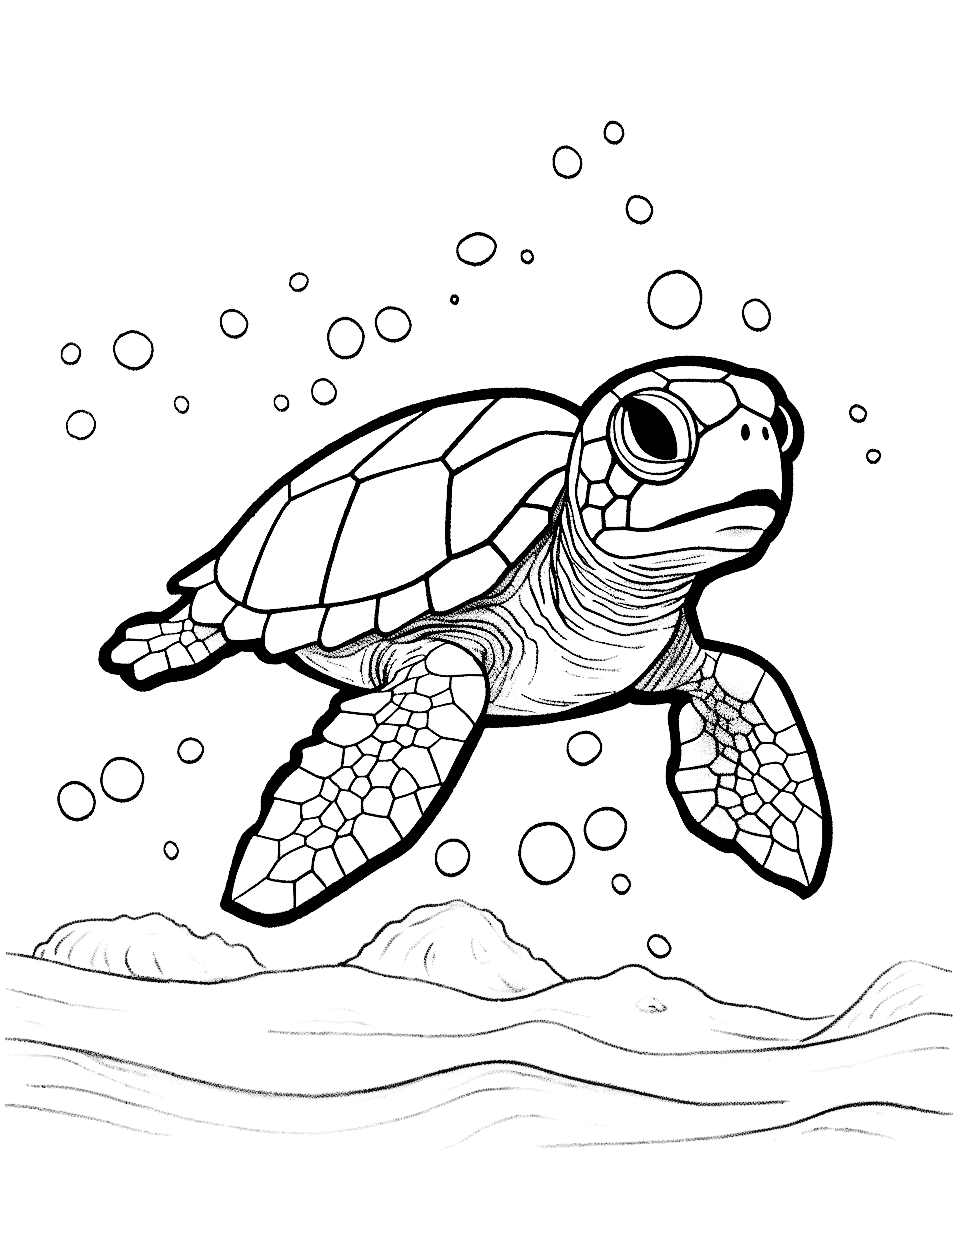 Baby Sea Turtle Cute Coloring Page - A tiny sea turtle swimming in the ocean.